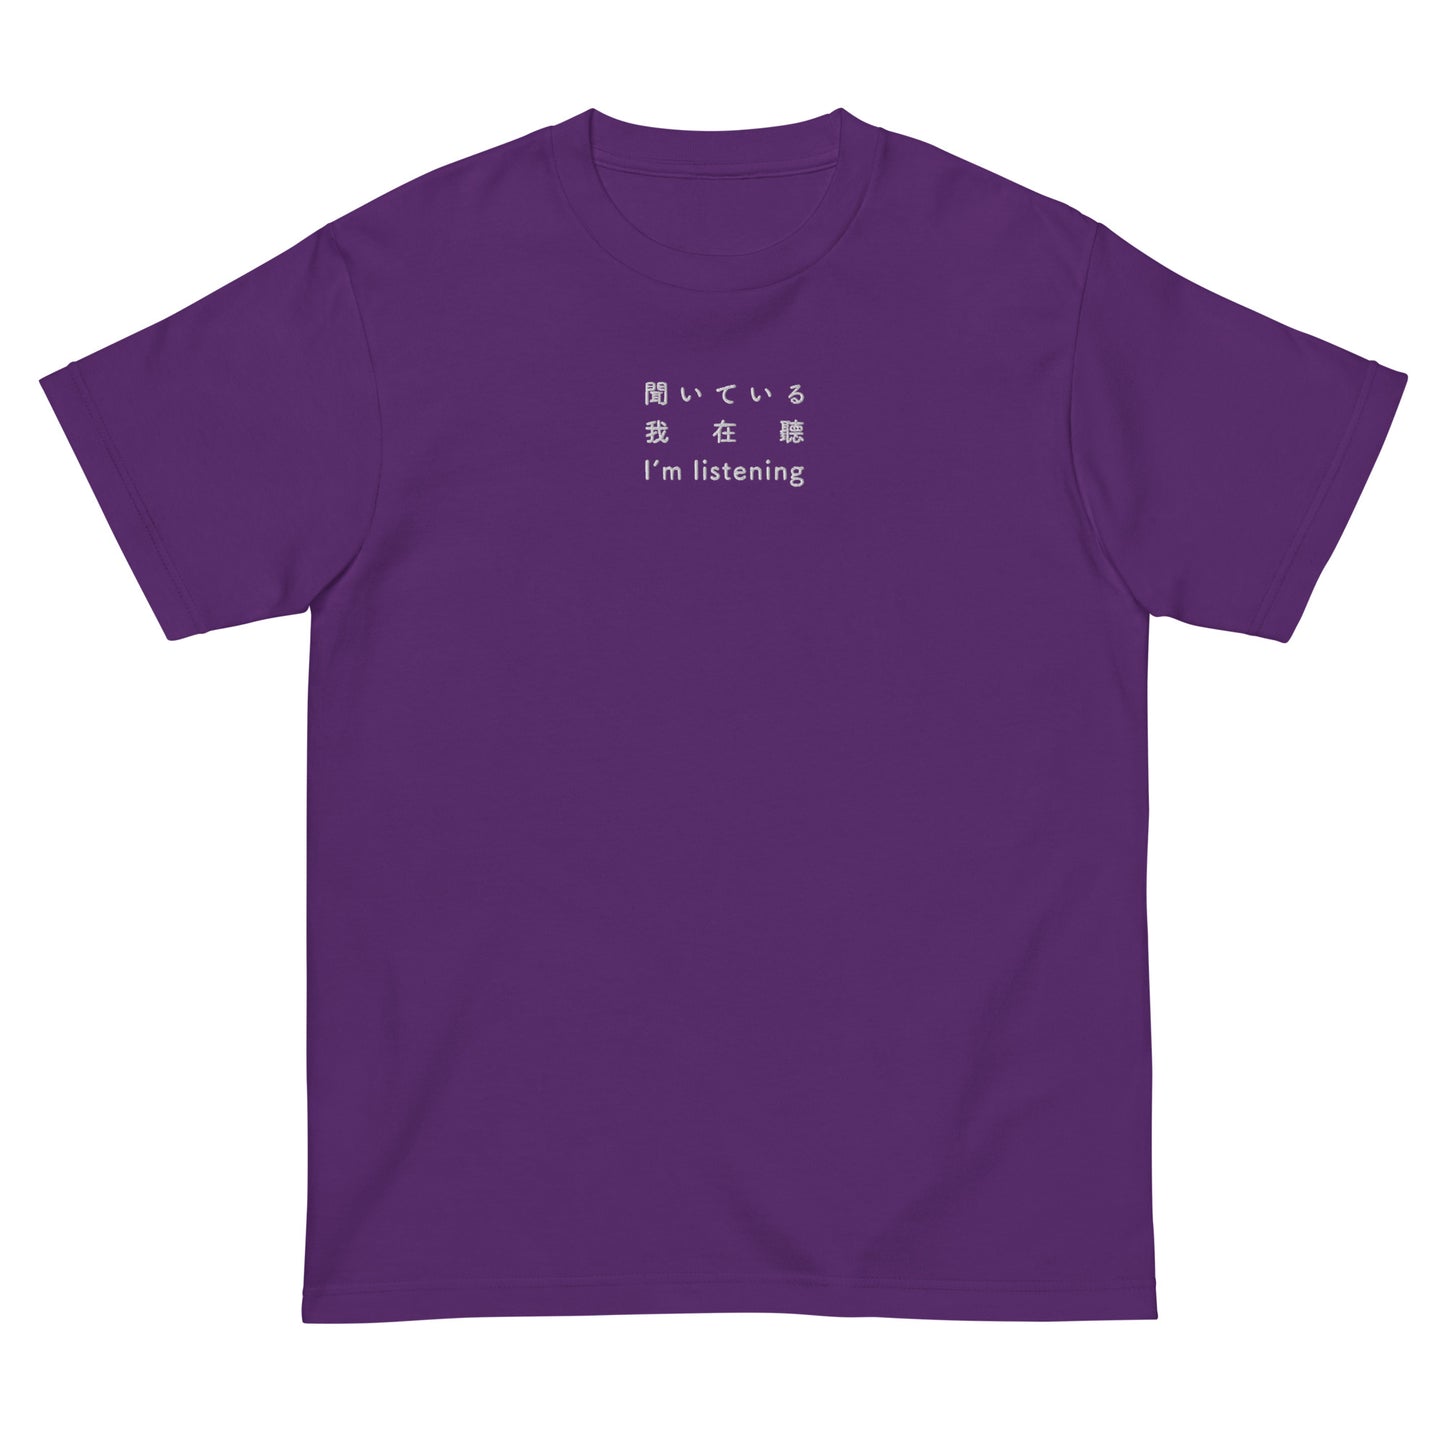 Purple High Quality Tee - Front Design with an White Embroidery "I'm listening" in Japanese,Chinese and English